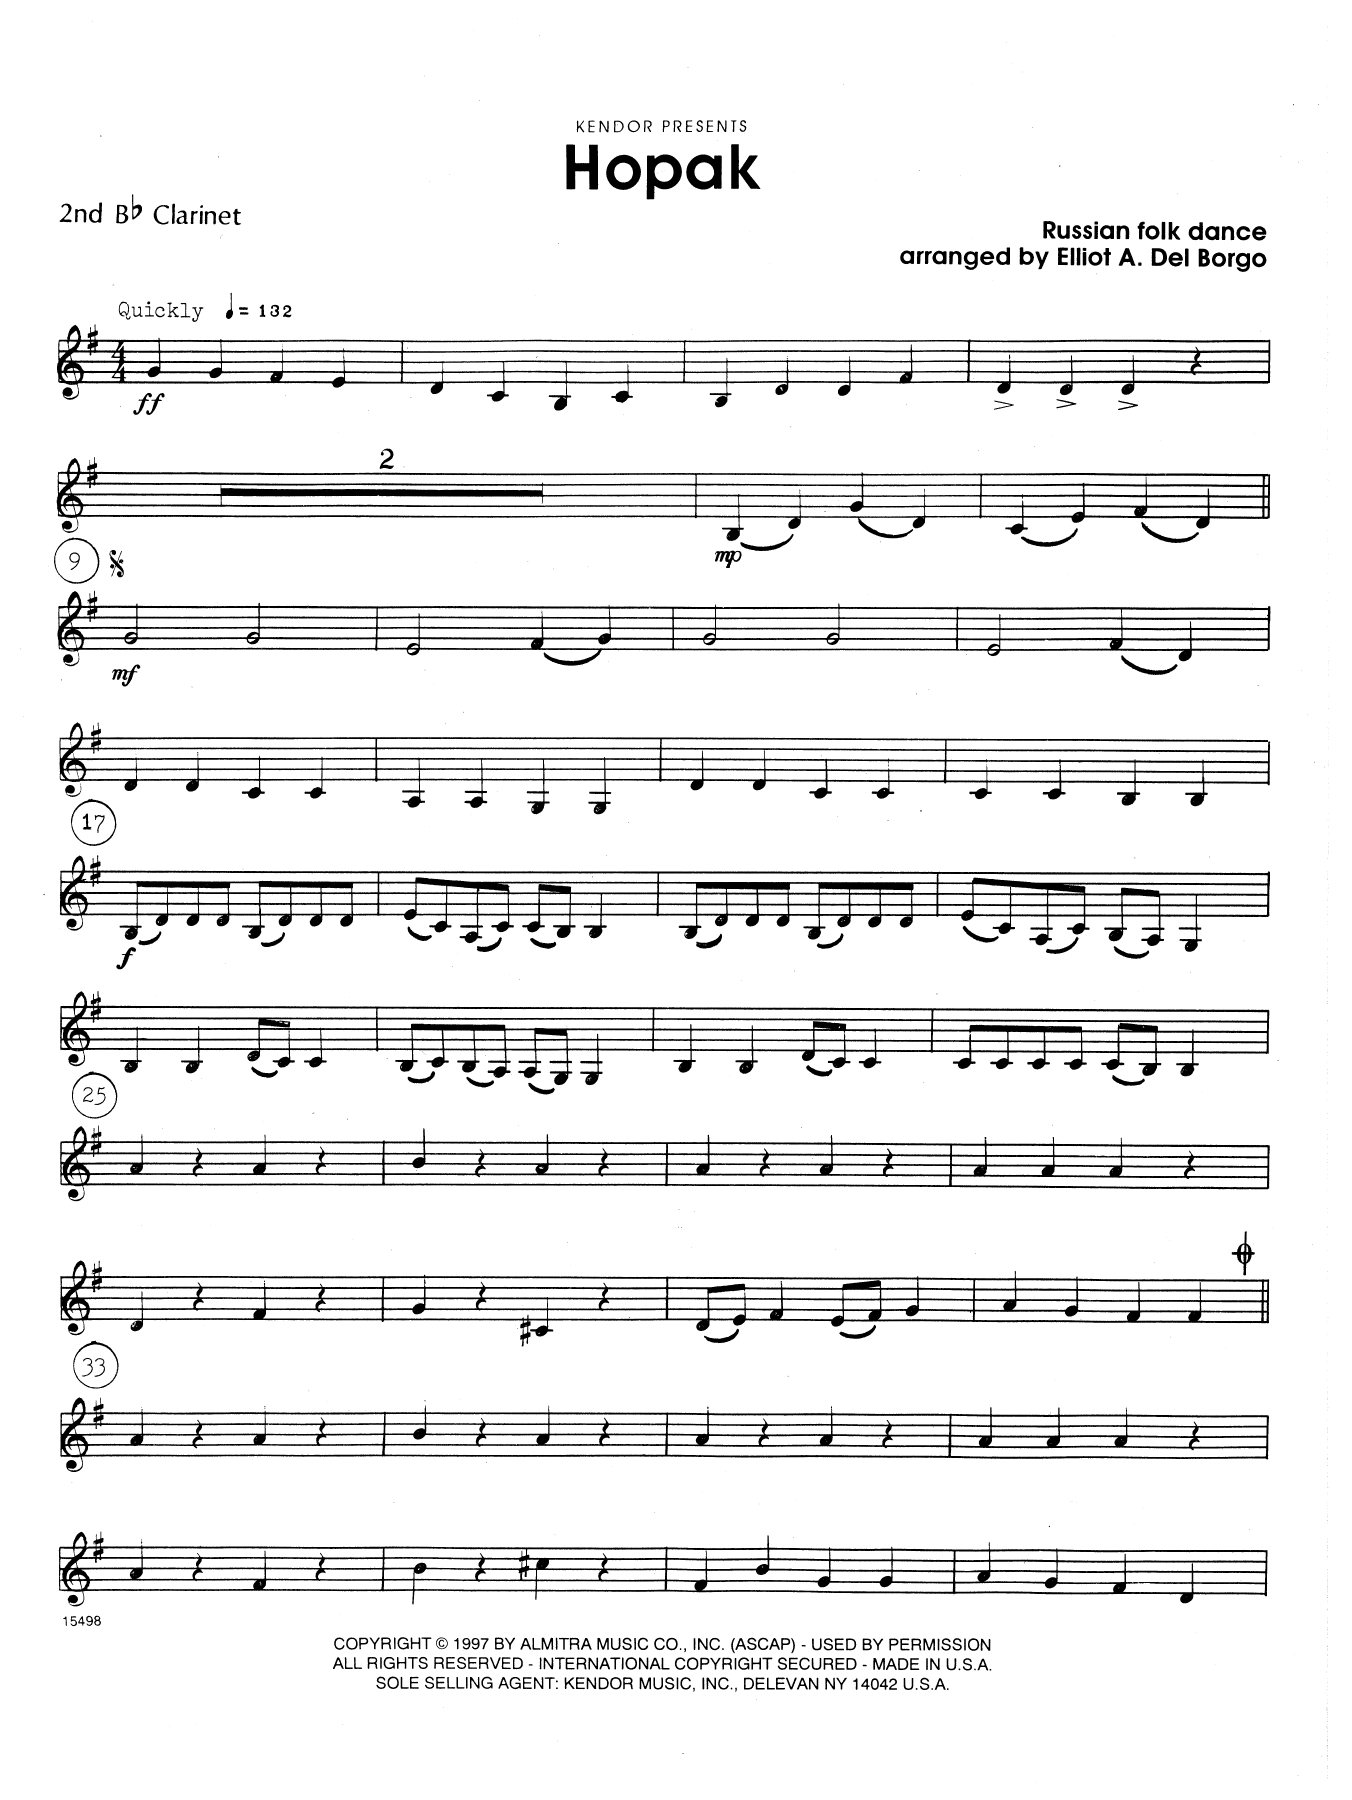 Elliot A. Del Borgo Hopak - 2nd Bb Clarinet sheet music notes and chords. Download Printable PDF.